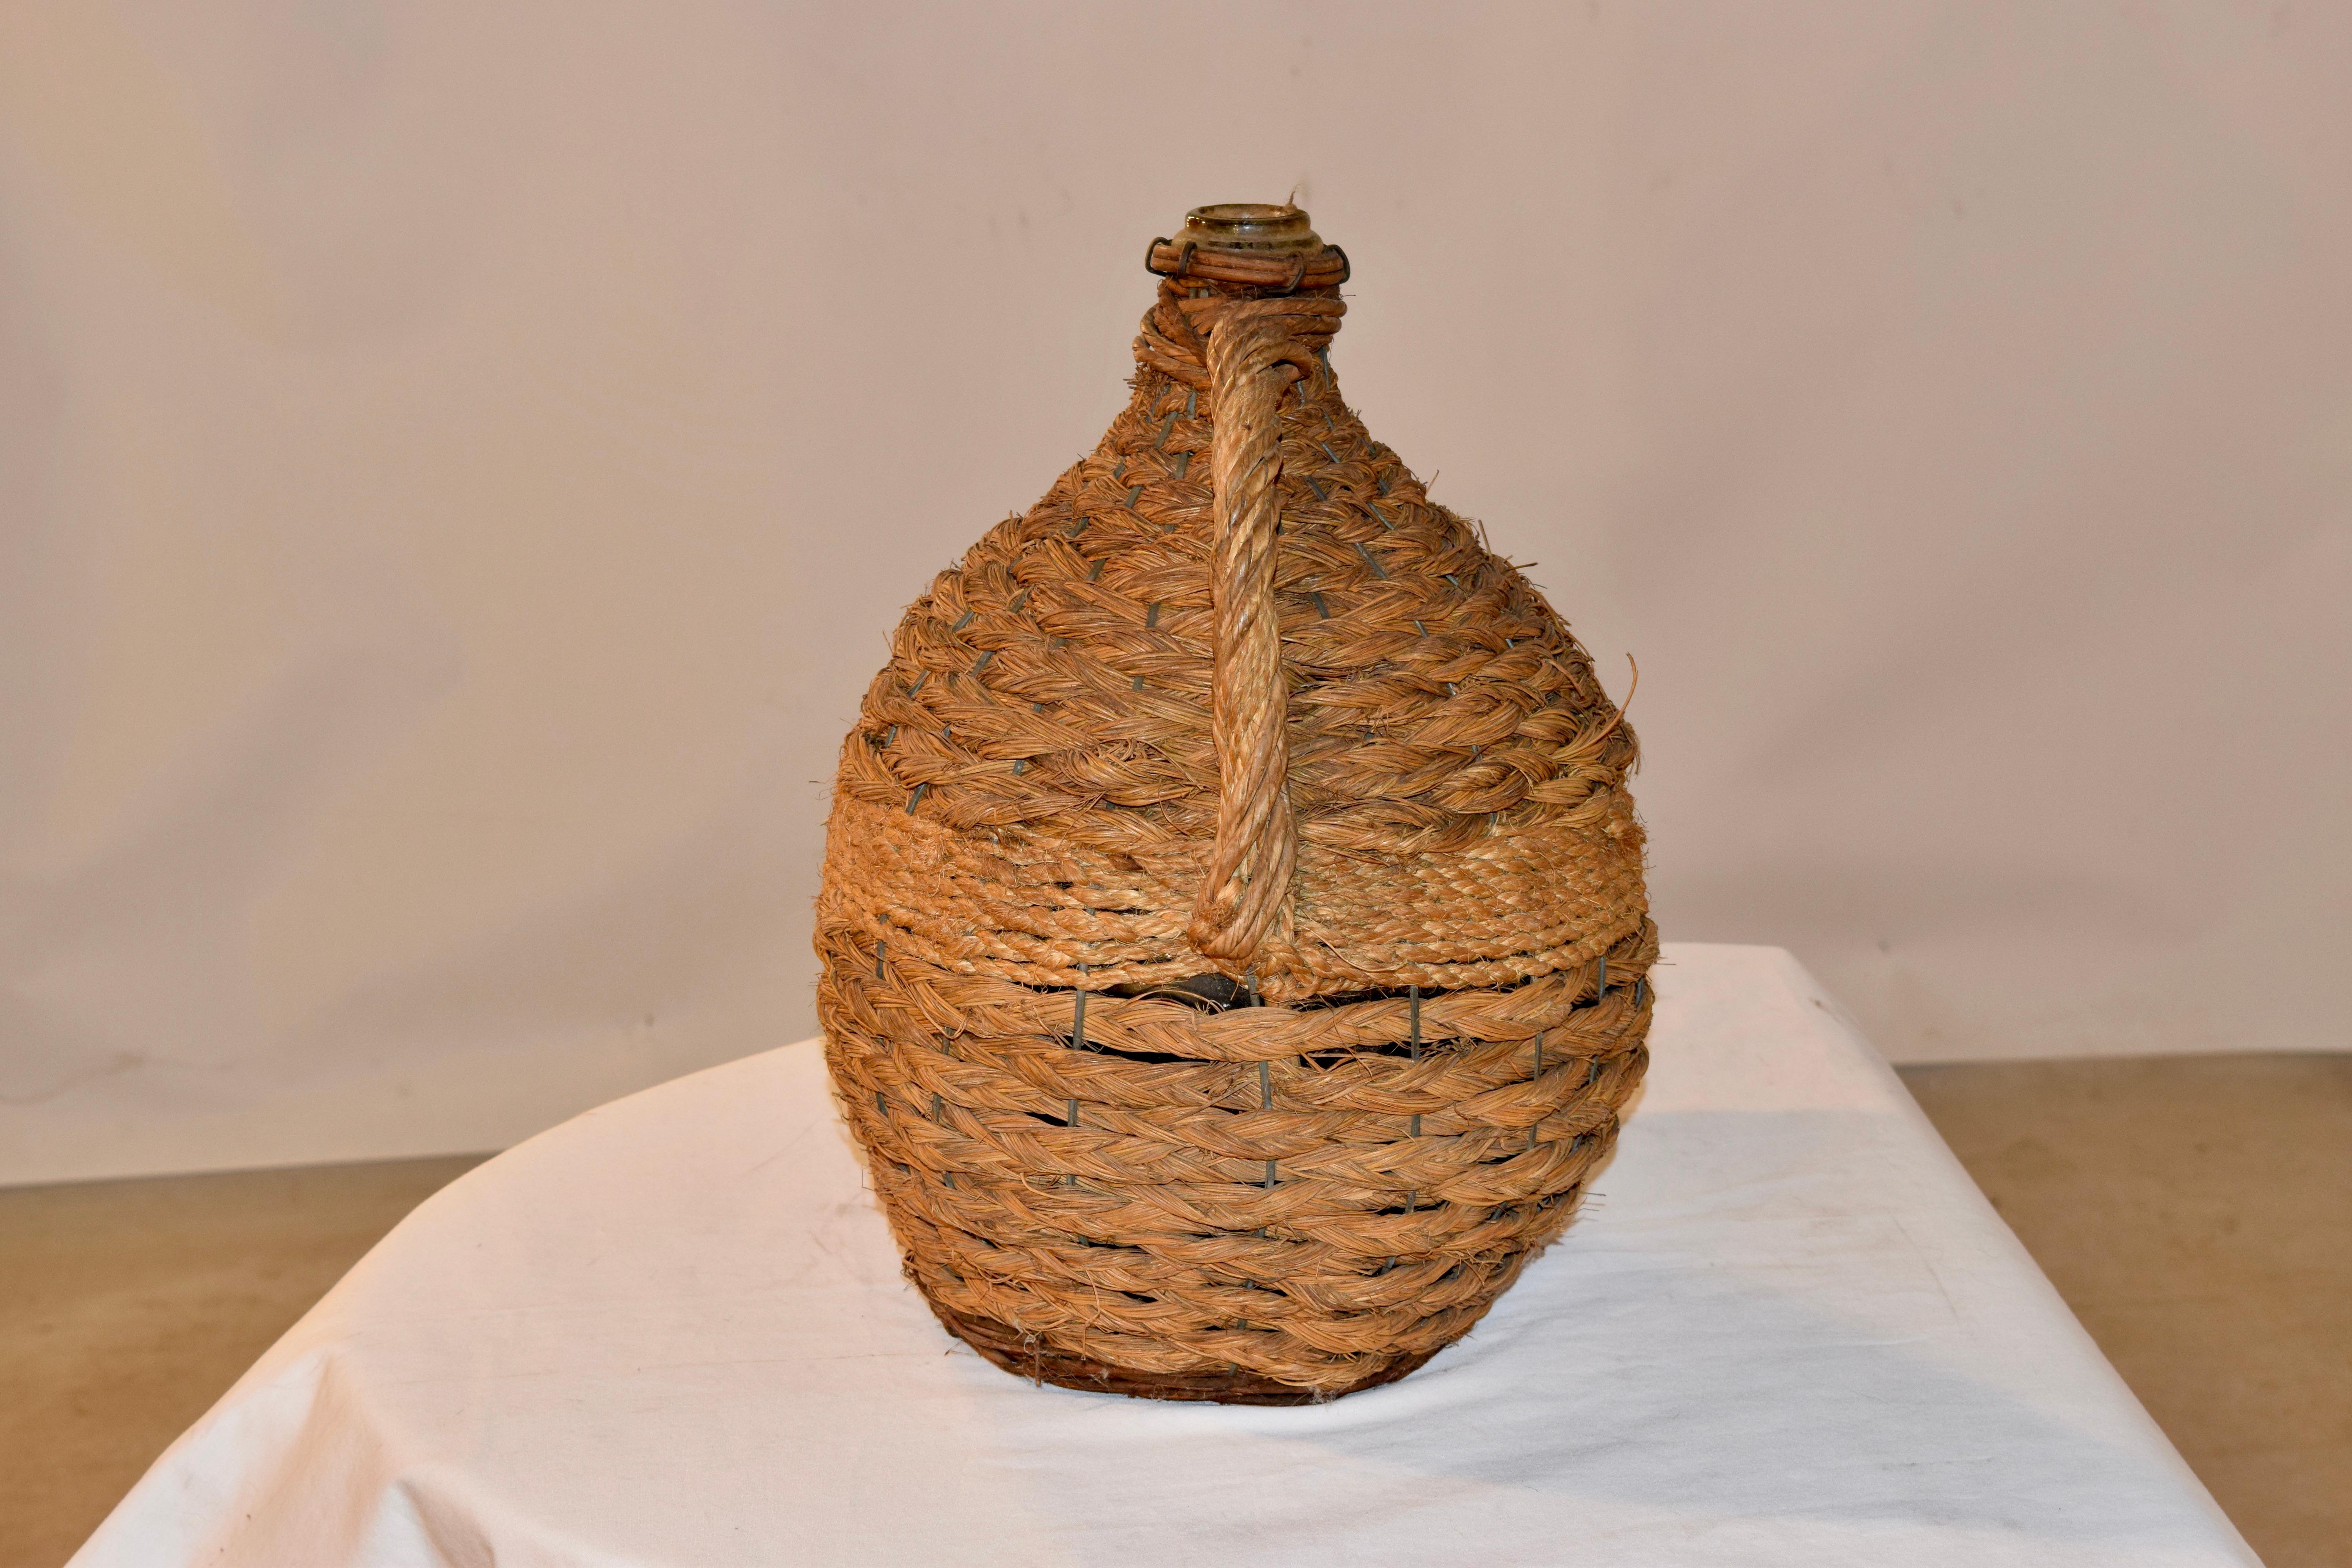 19th century French globular form hand blown glass demijohn bottle encased in original braided rope. Layers of different kinds of rope have been used, which has created an interesting texture.